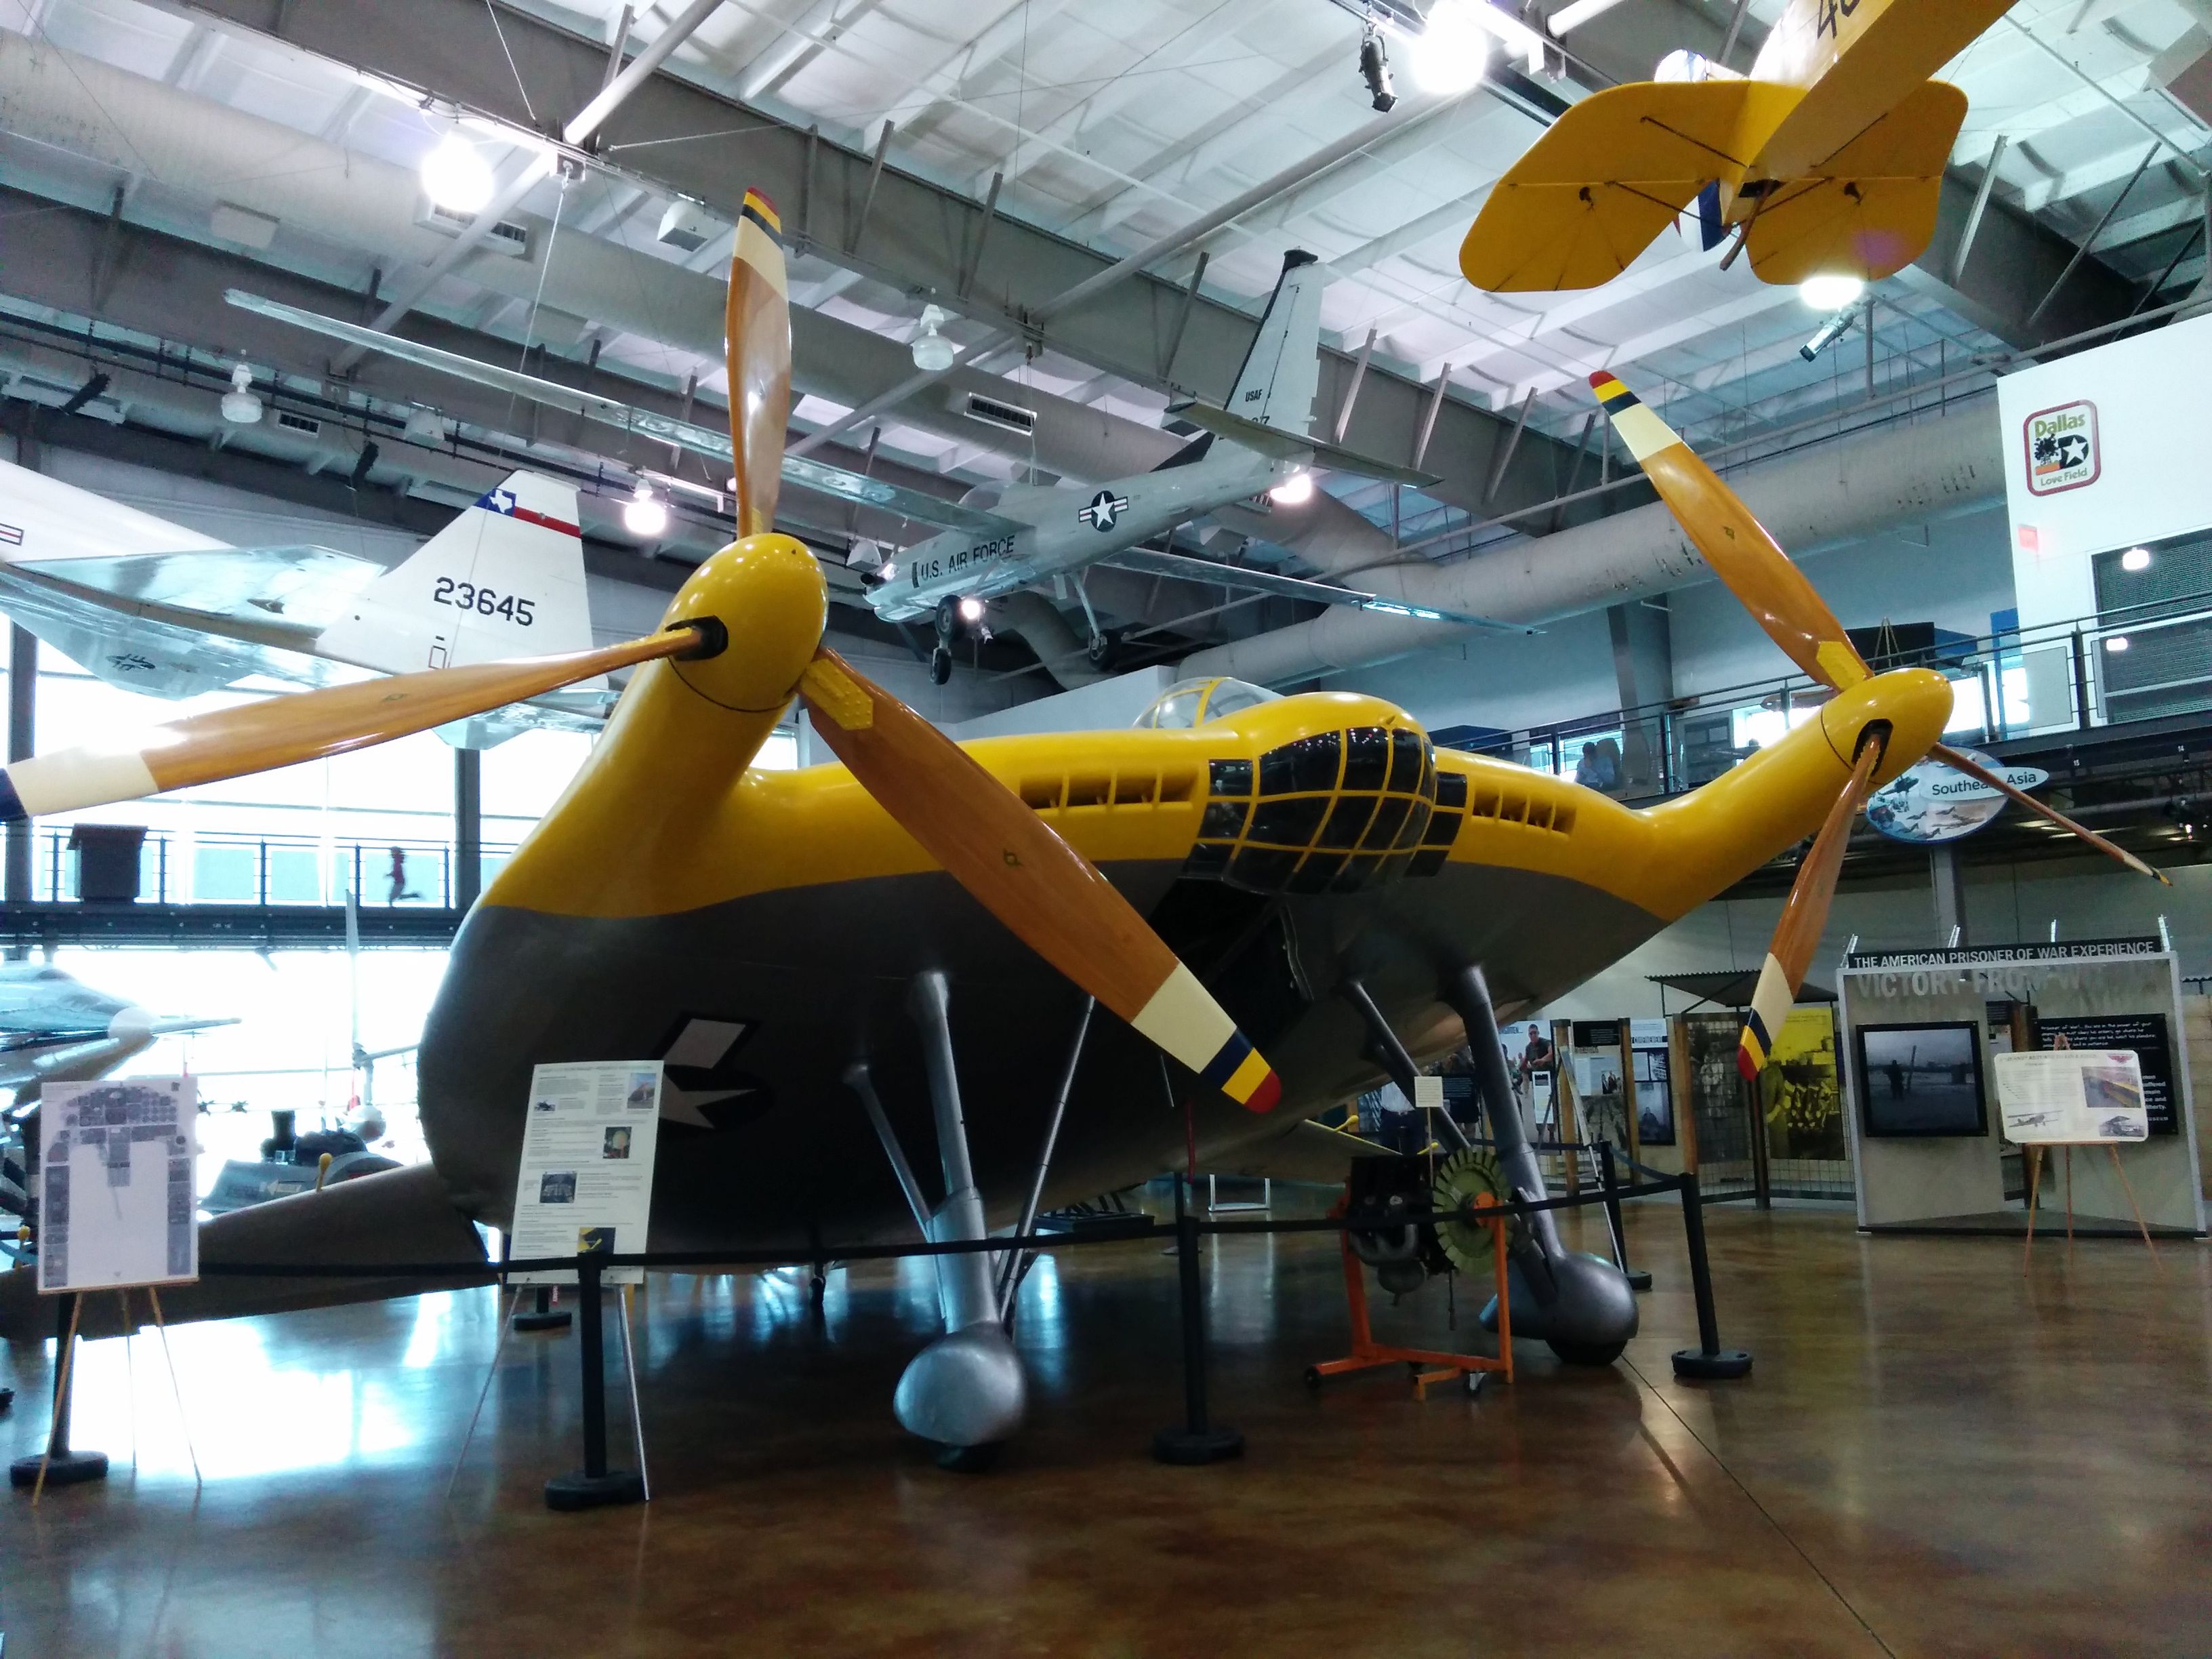  A Restored Vought V-173 on display at the Frontiers of Flight Museum in Dallas, TX.